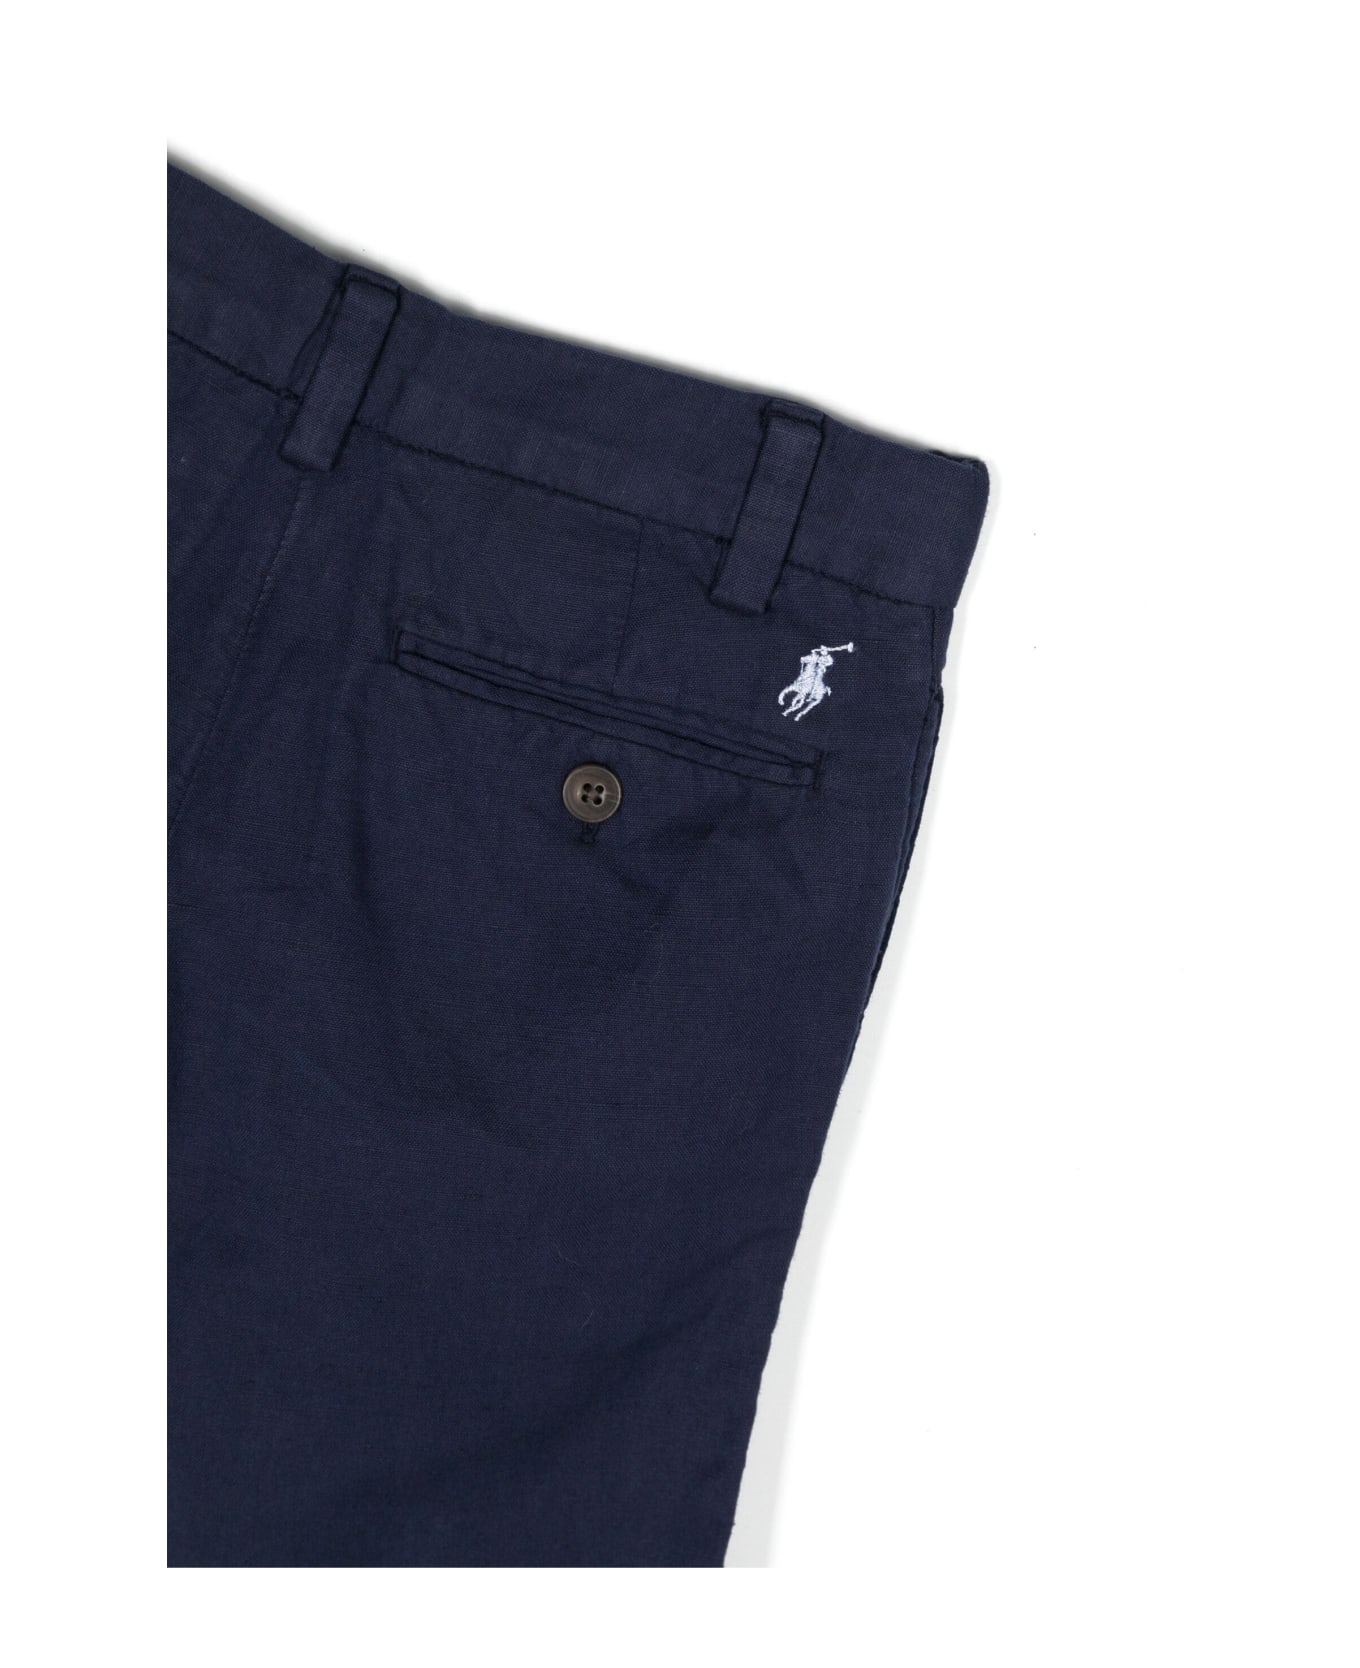 Ralph Lauren Polo Pony Shorts In Navy Blue - Blue ボトムス